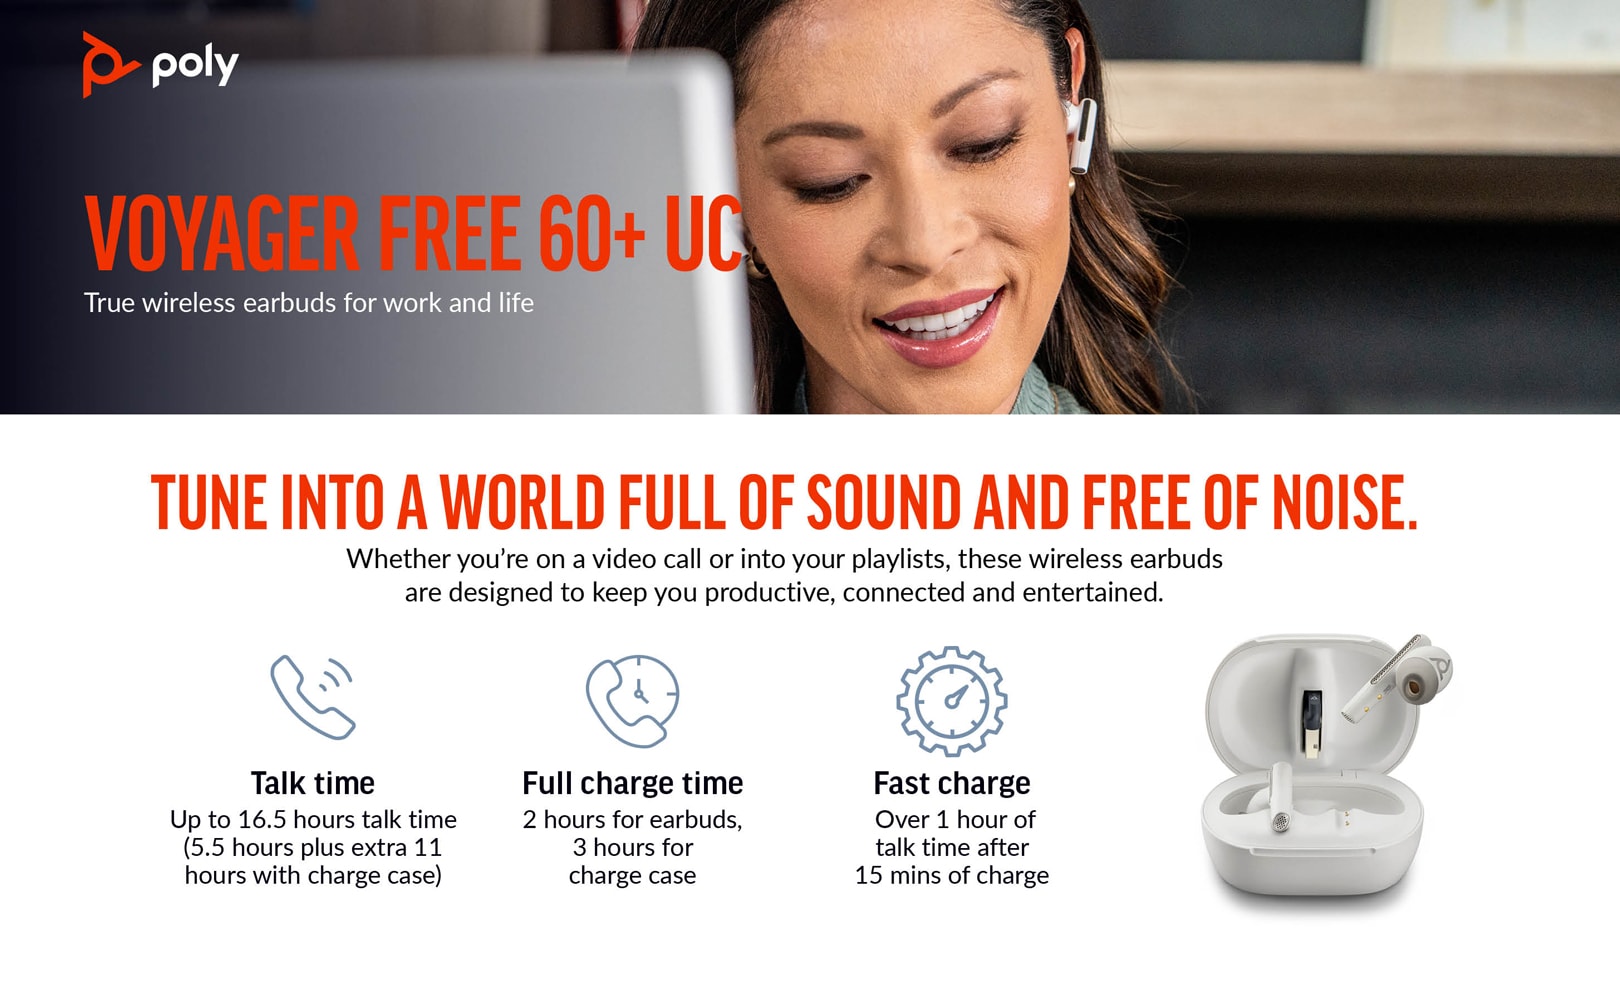 Poly Voyager Free 60+ A Charge UC Earbuds, Touchscreen Case USB White BT700 adapter, Sand